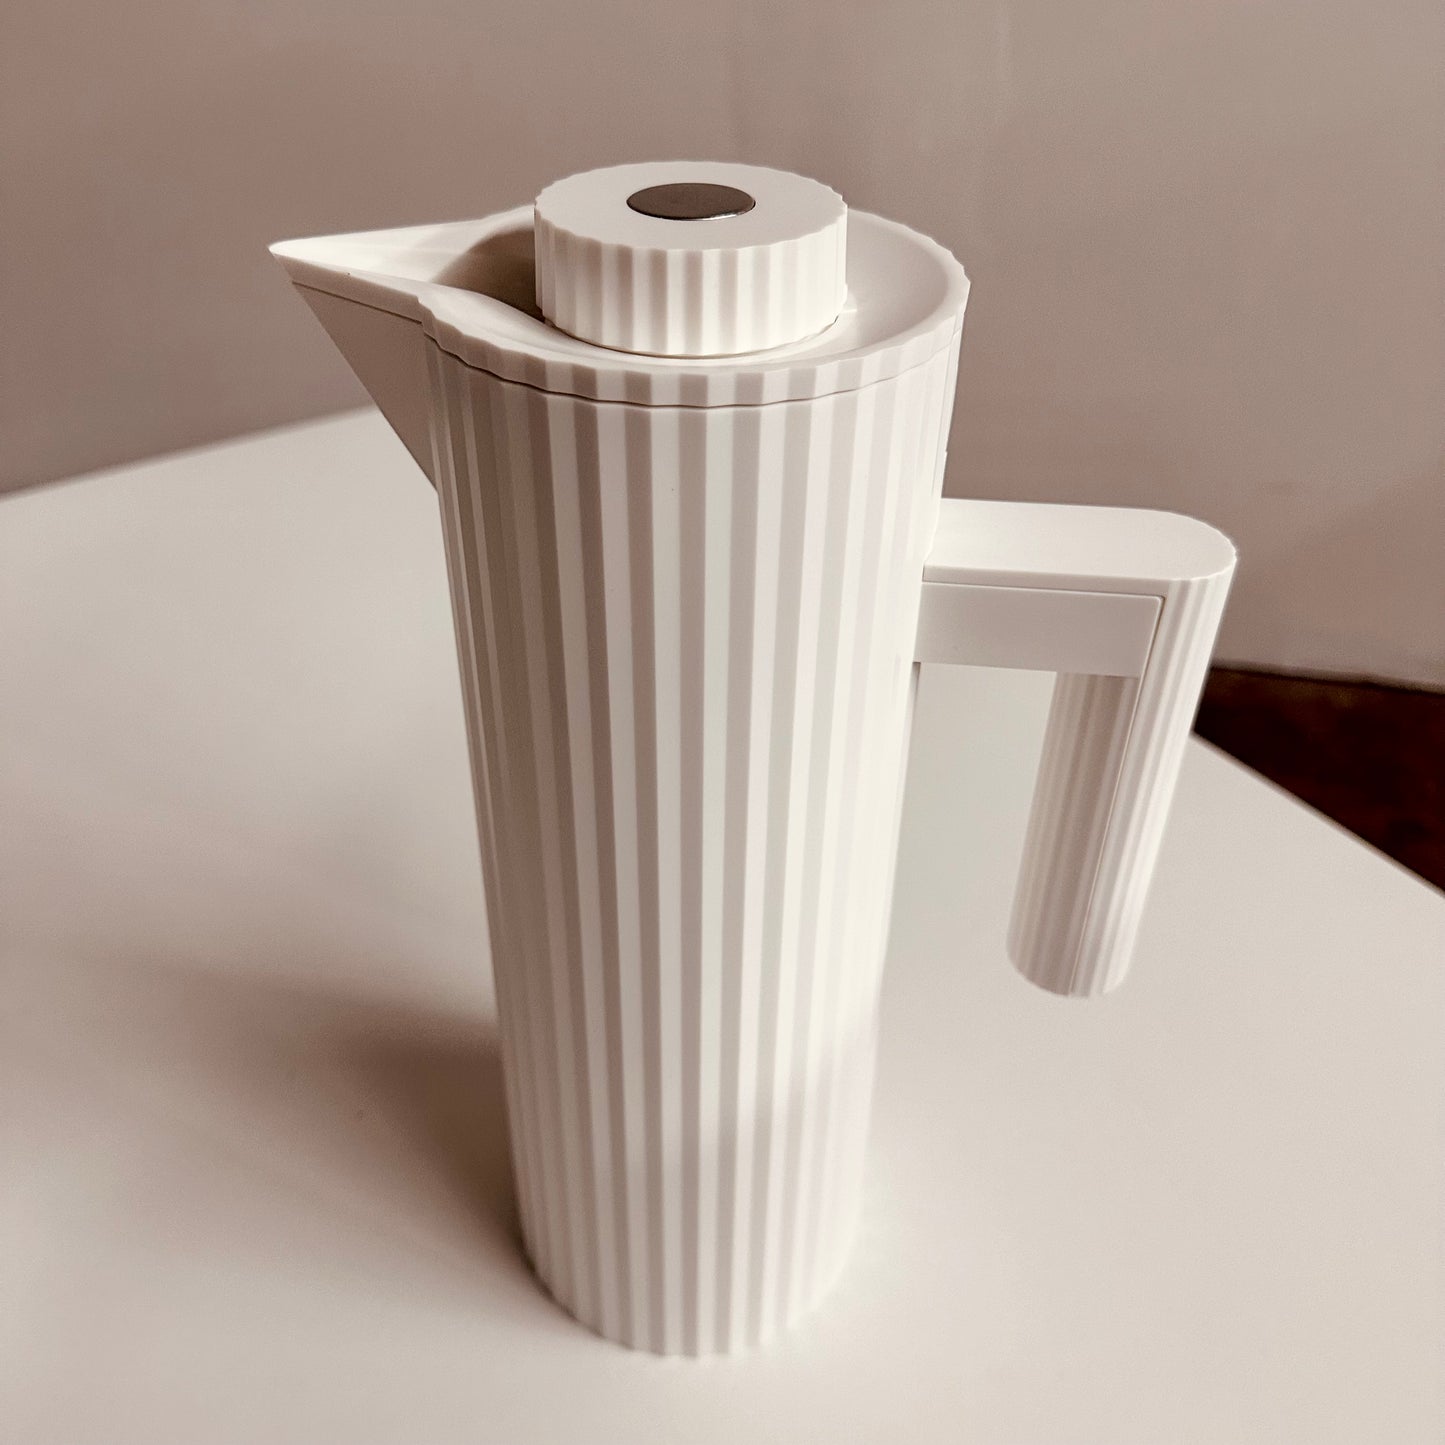 MICHELE DE LUCCHI FOR ALESSI PLISSÉ INSULATED THERMOS PITCHER